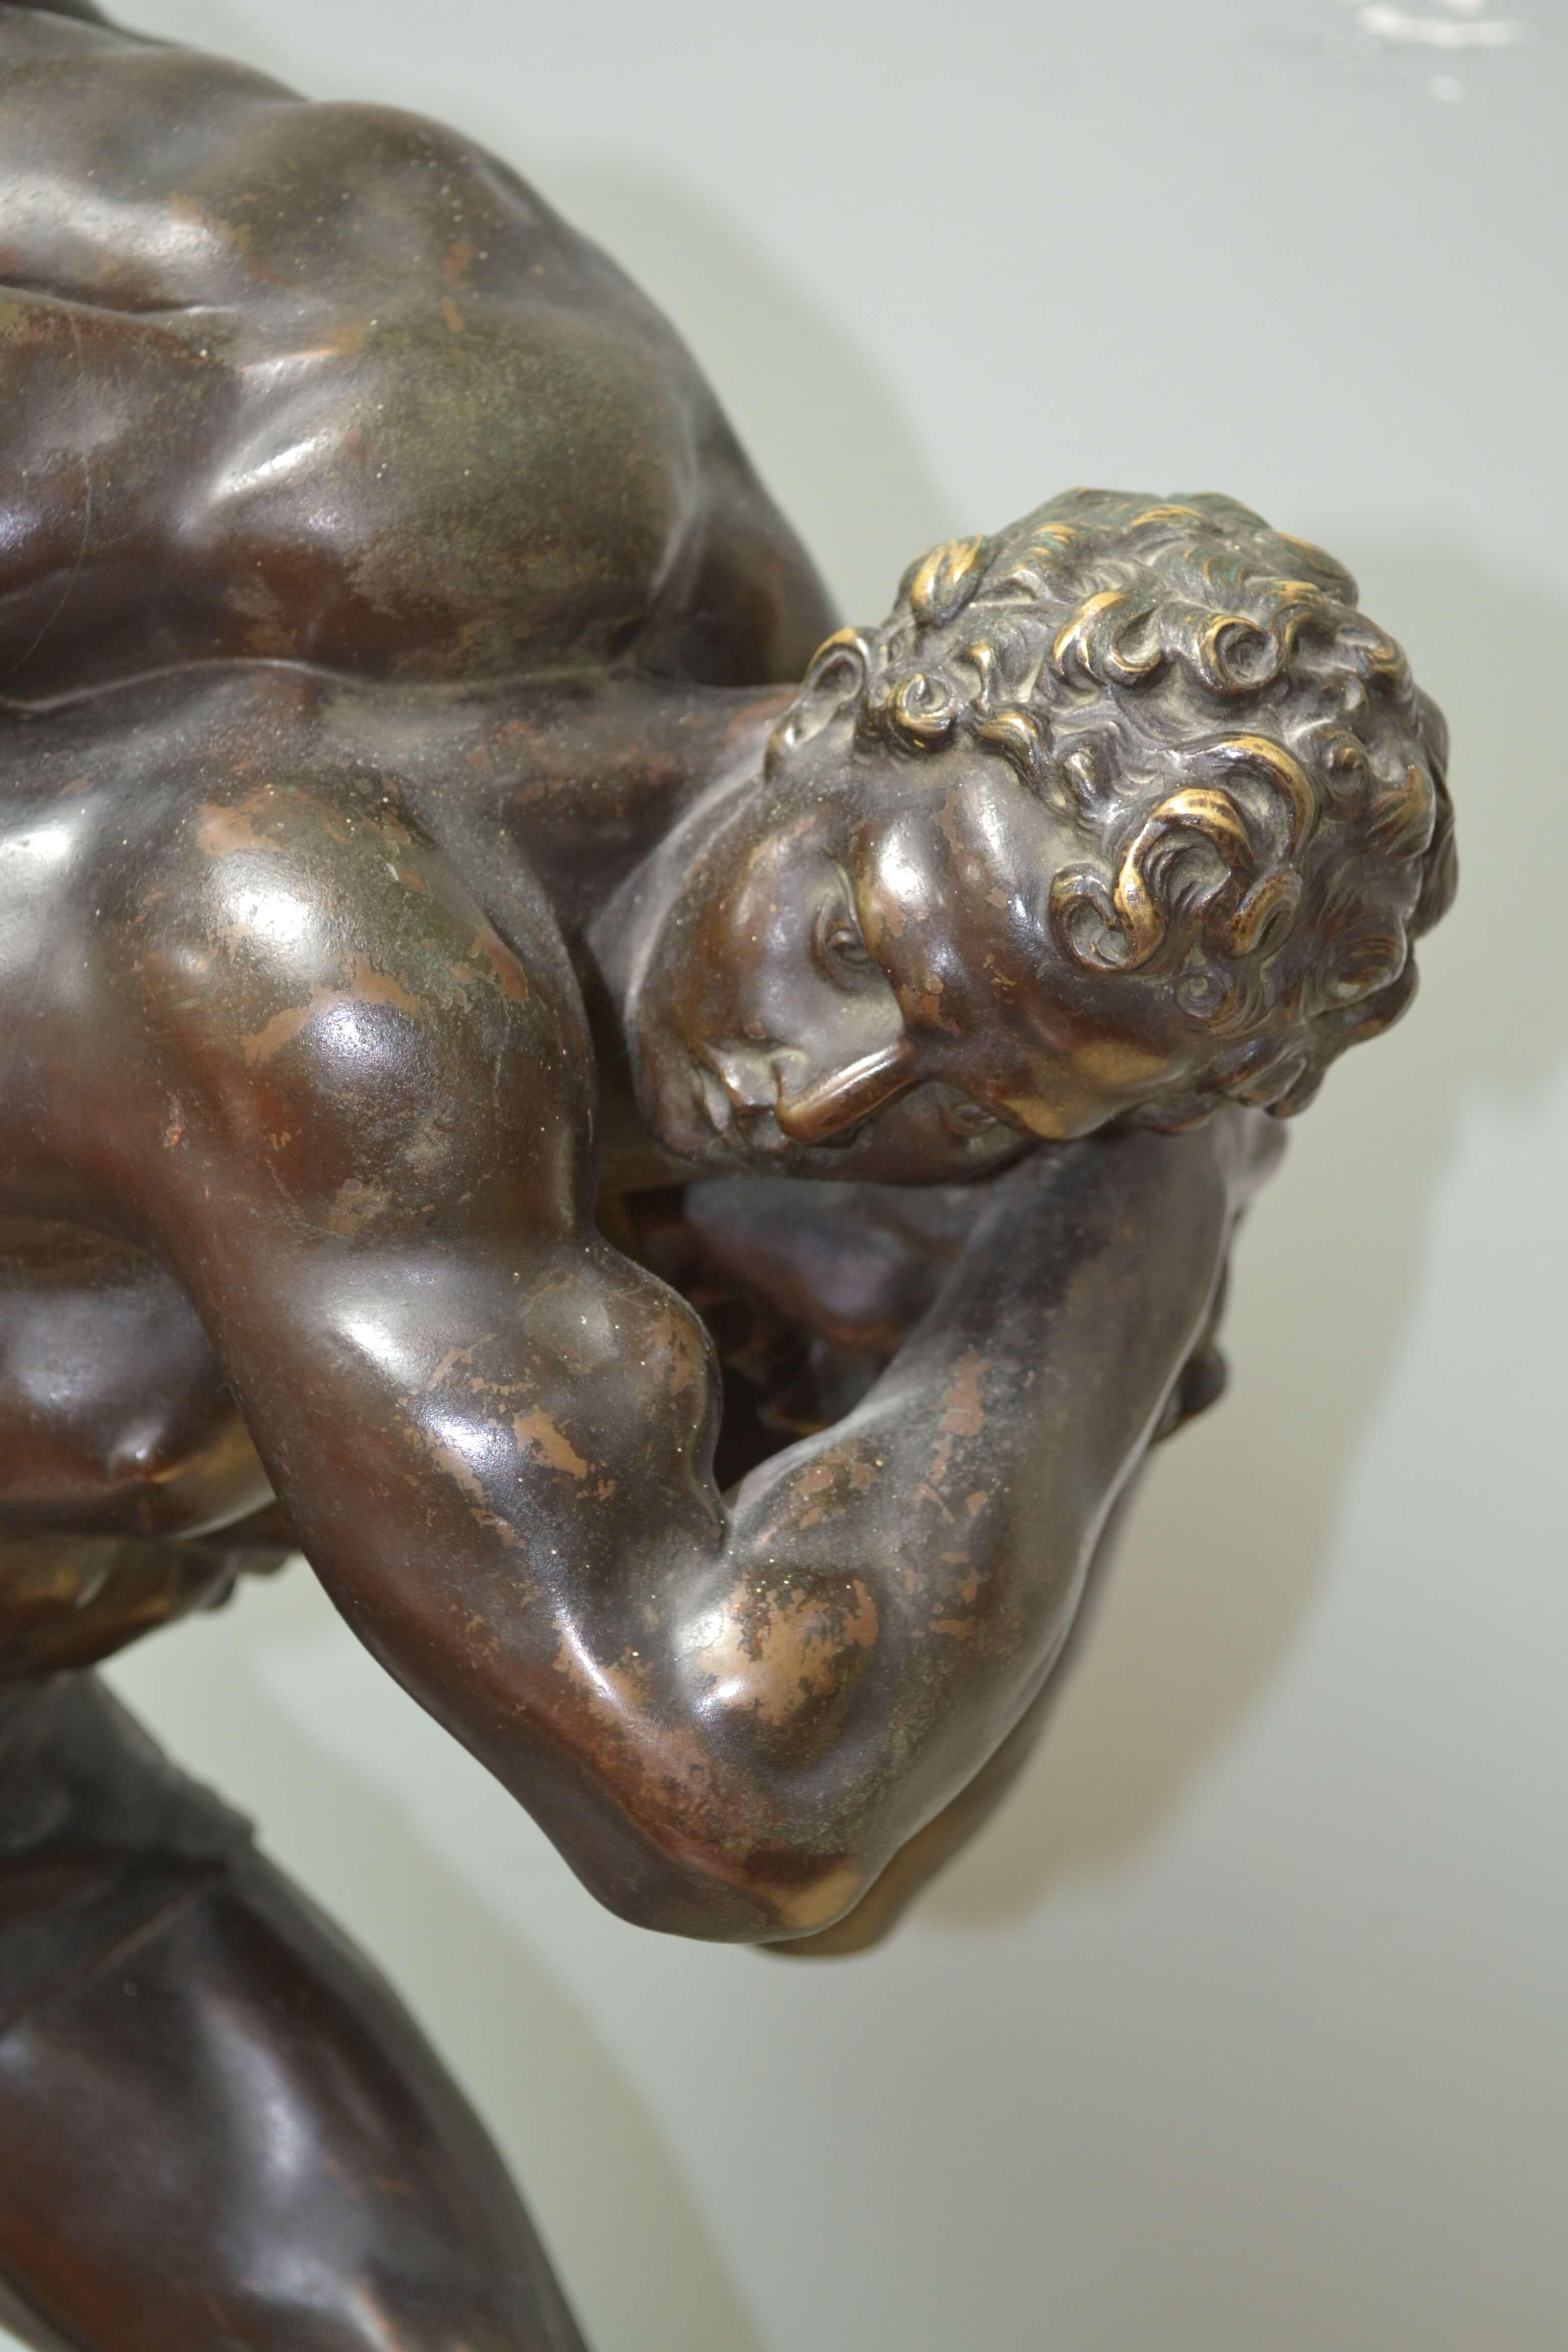 A rare bronze titled Les Lutteurs (The Wrestlers) by Francois Marius Laugier depicting two classically proportioned male figures at the peak of youth and strength, in the pivotal moment in wrestling, after the initial lift and before the fall. The